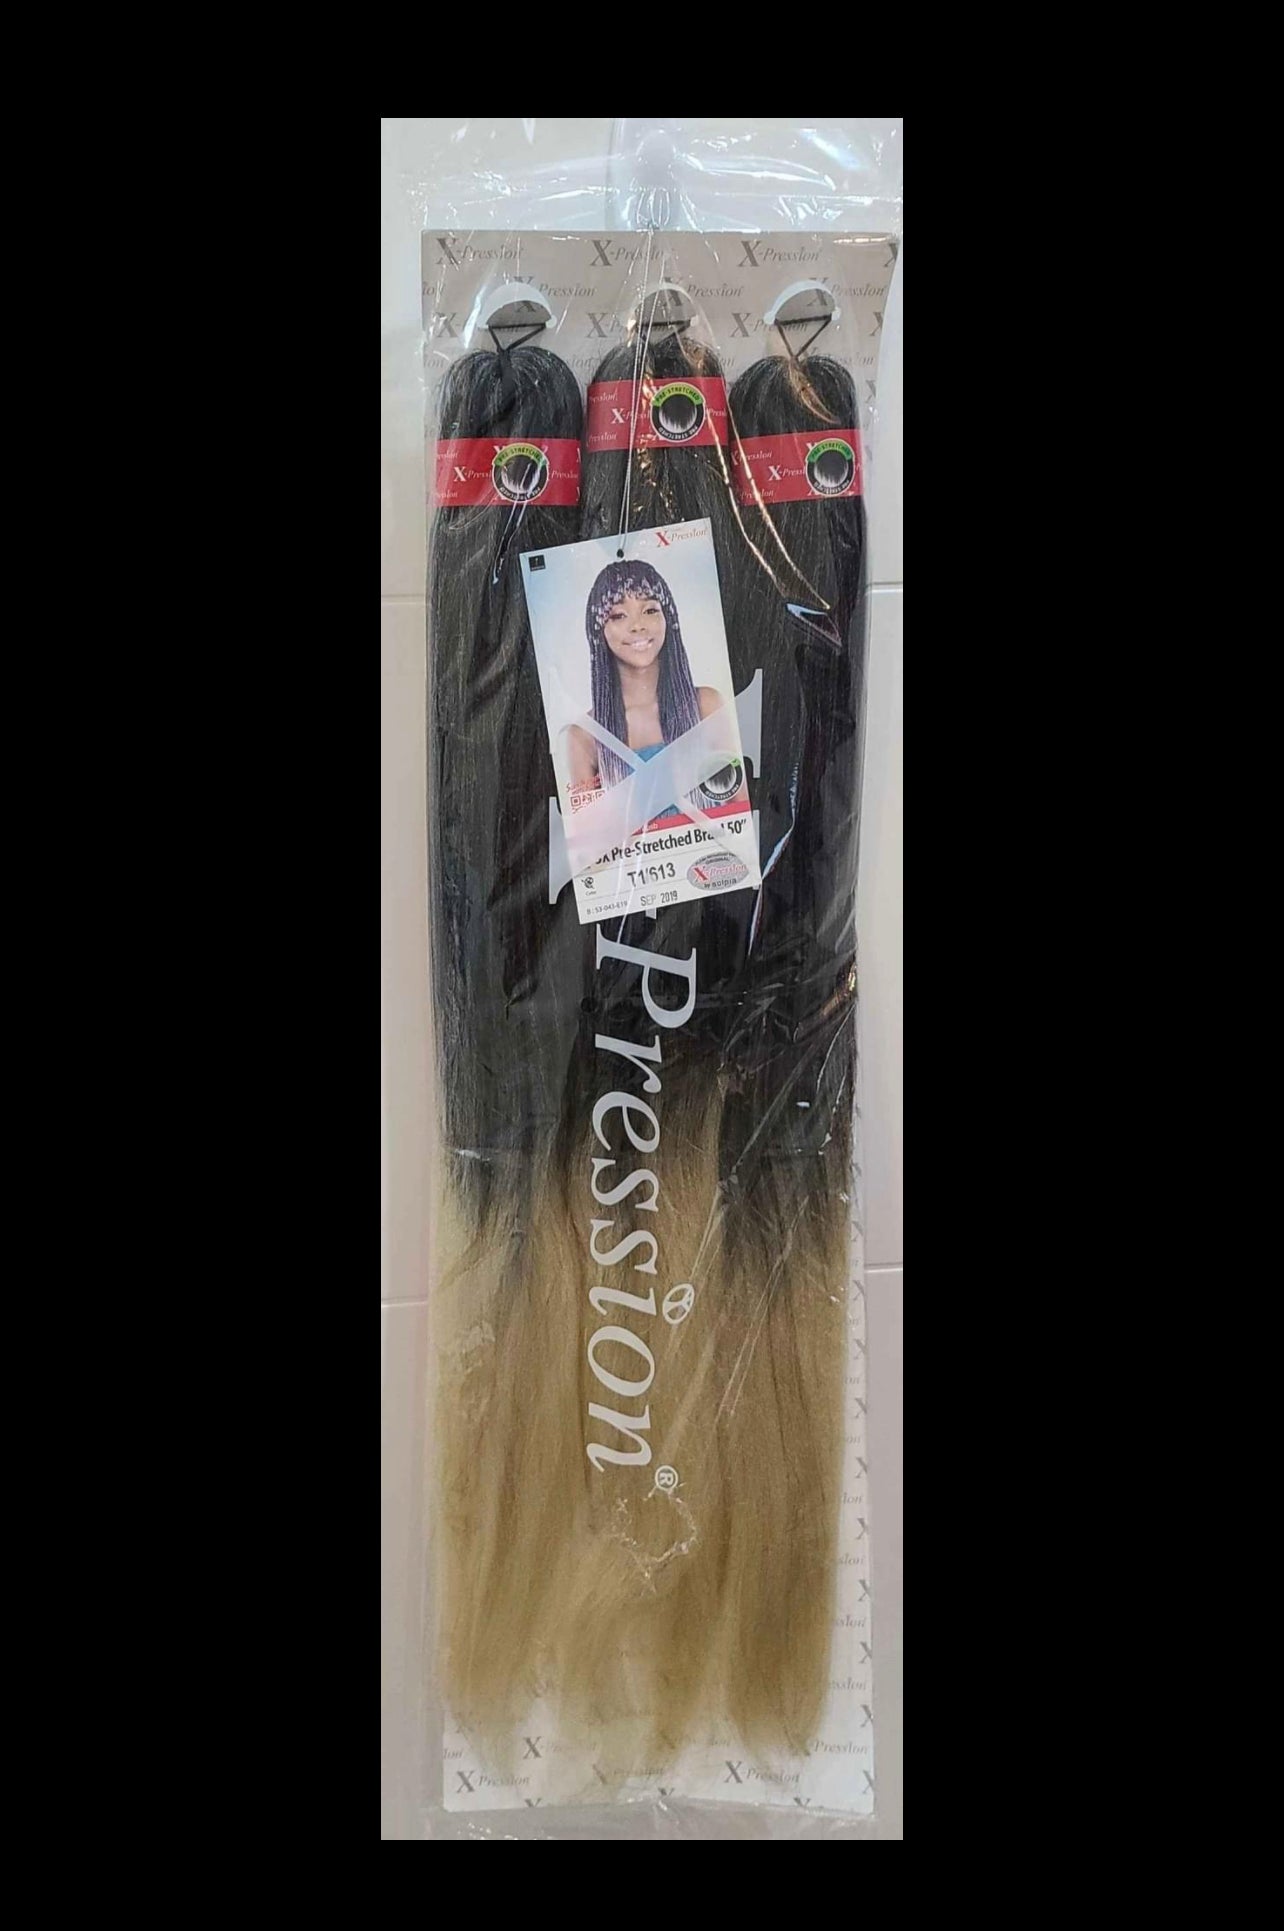 3X X-Pression Pre-stretched Braiding Hair Extensions 40”